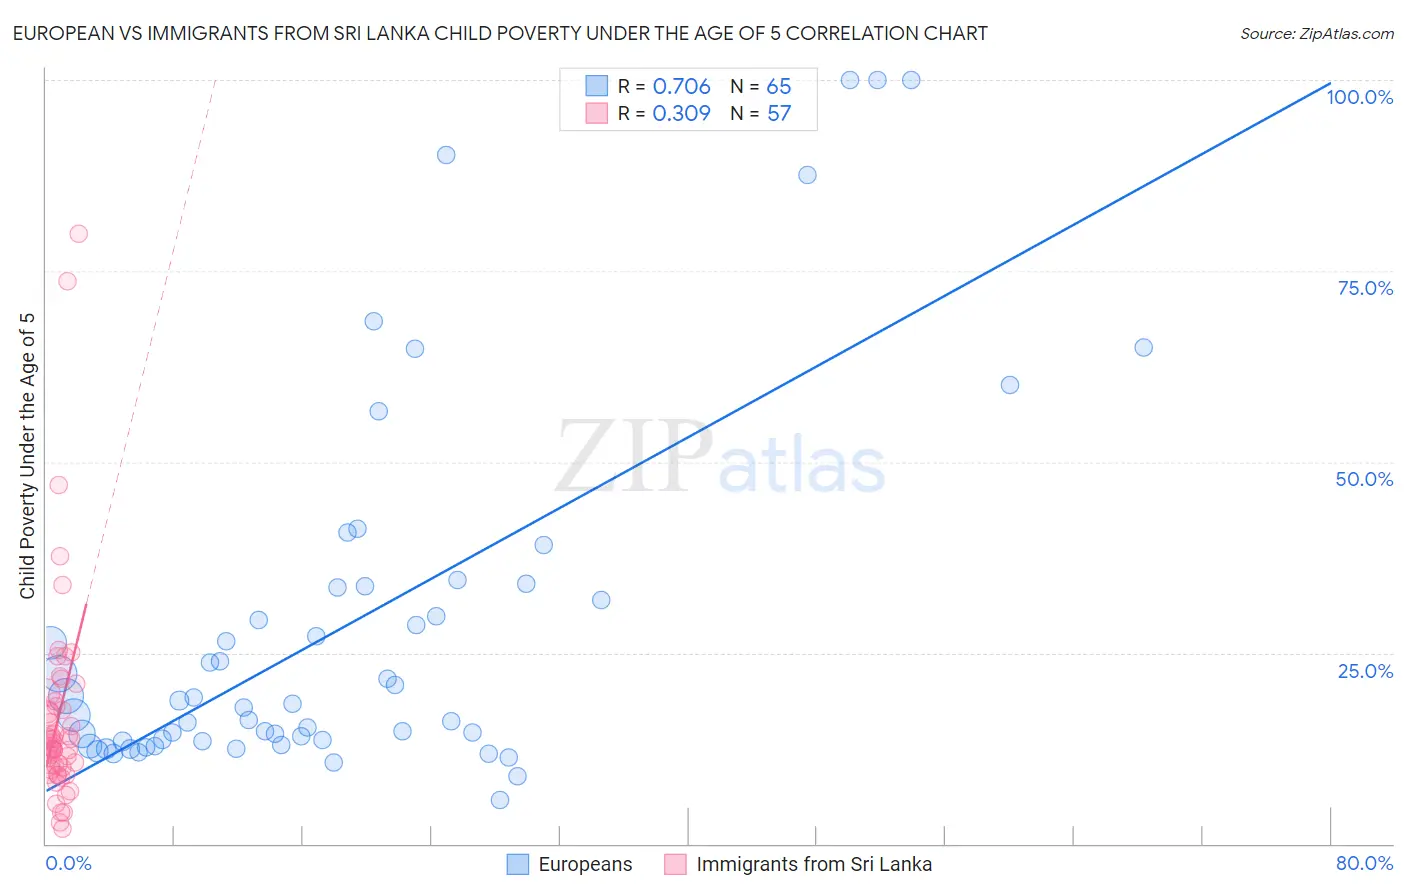 European vs Immigrants from Sri Lanka Child Poverty Under the Age of 5